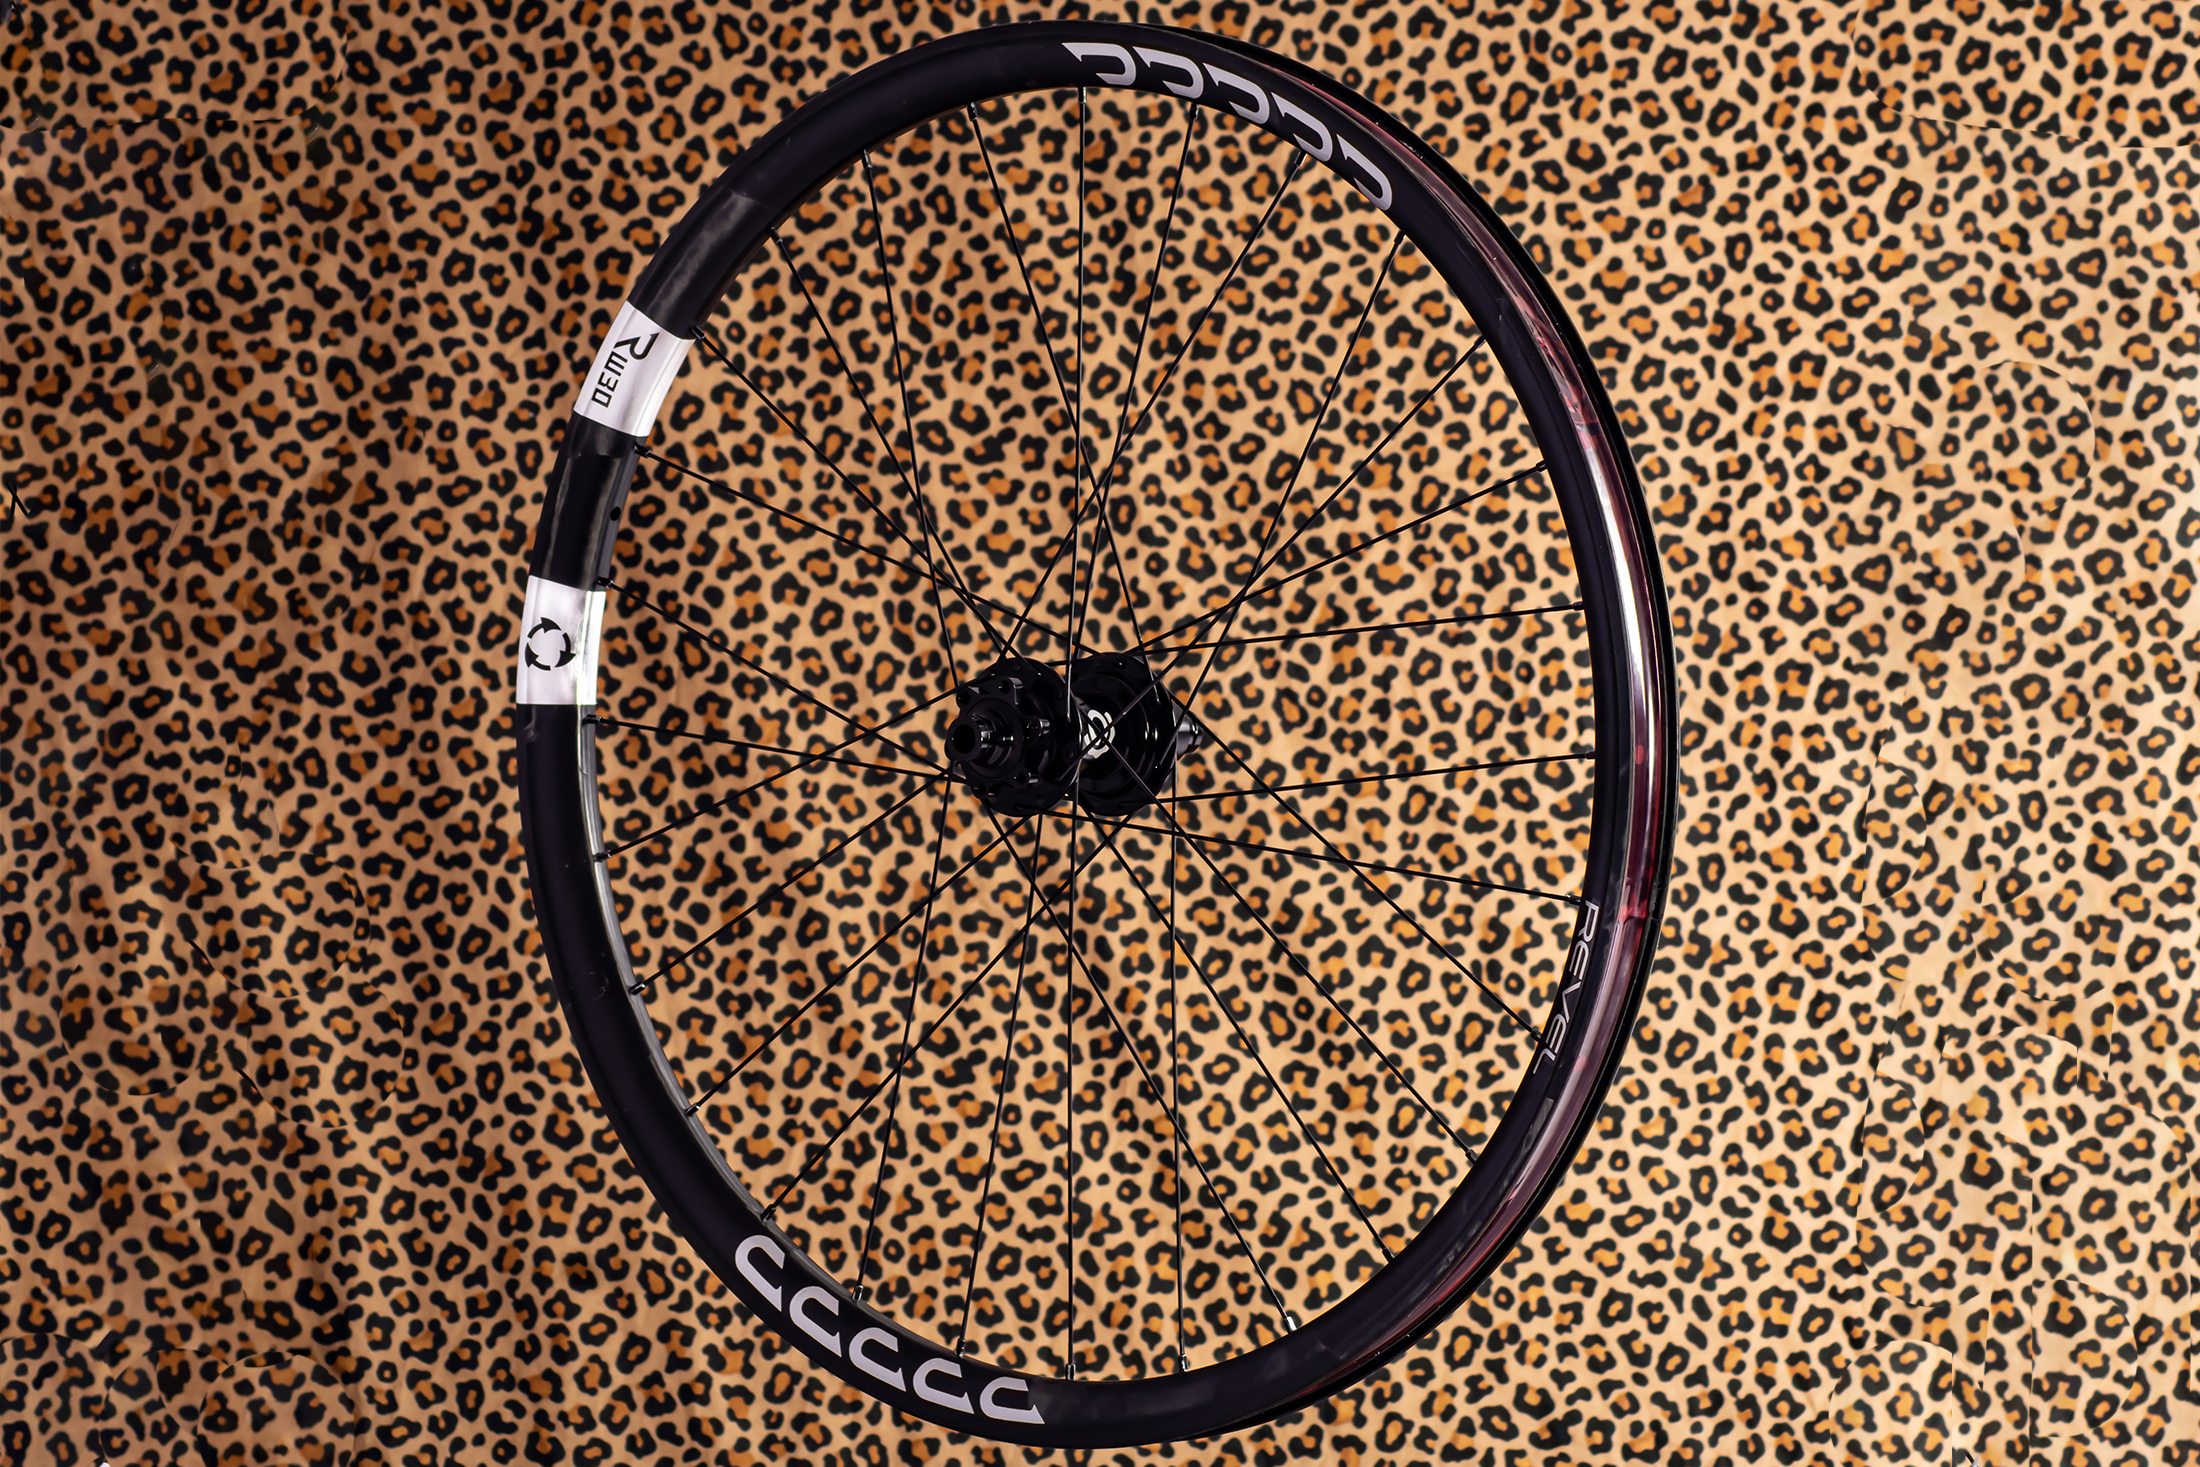 Recyclable Carbon Wheels: Revel Introduces Revolutionary Bike Tech